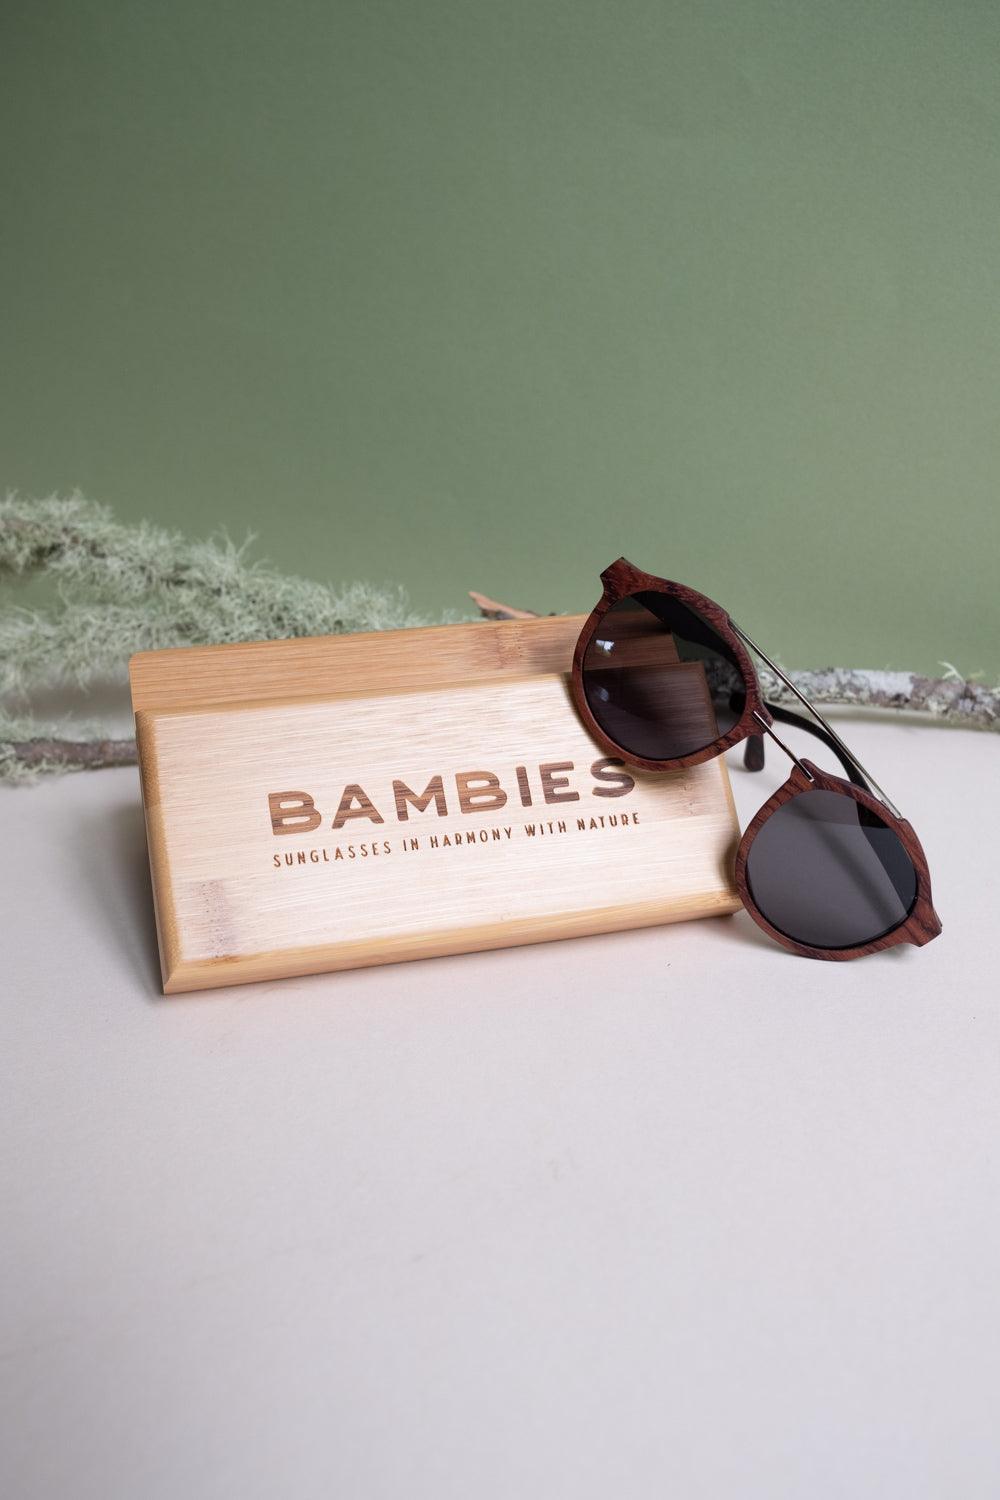 All wooden sunglasses - Bambies